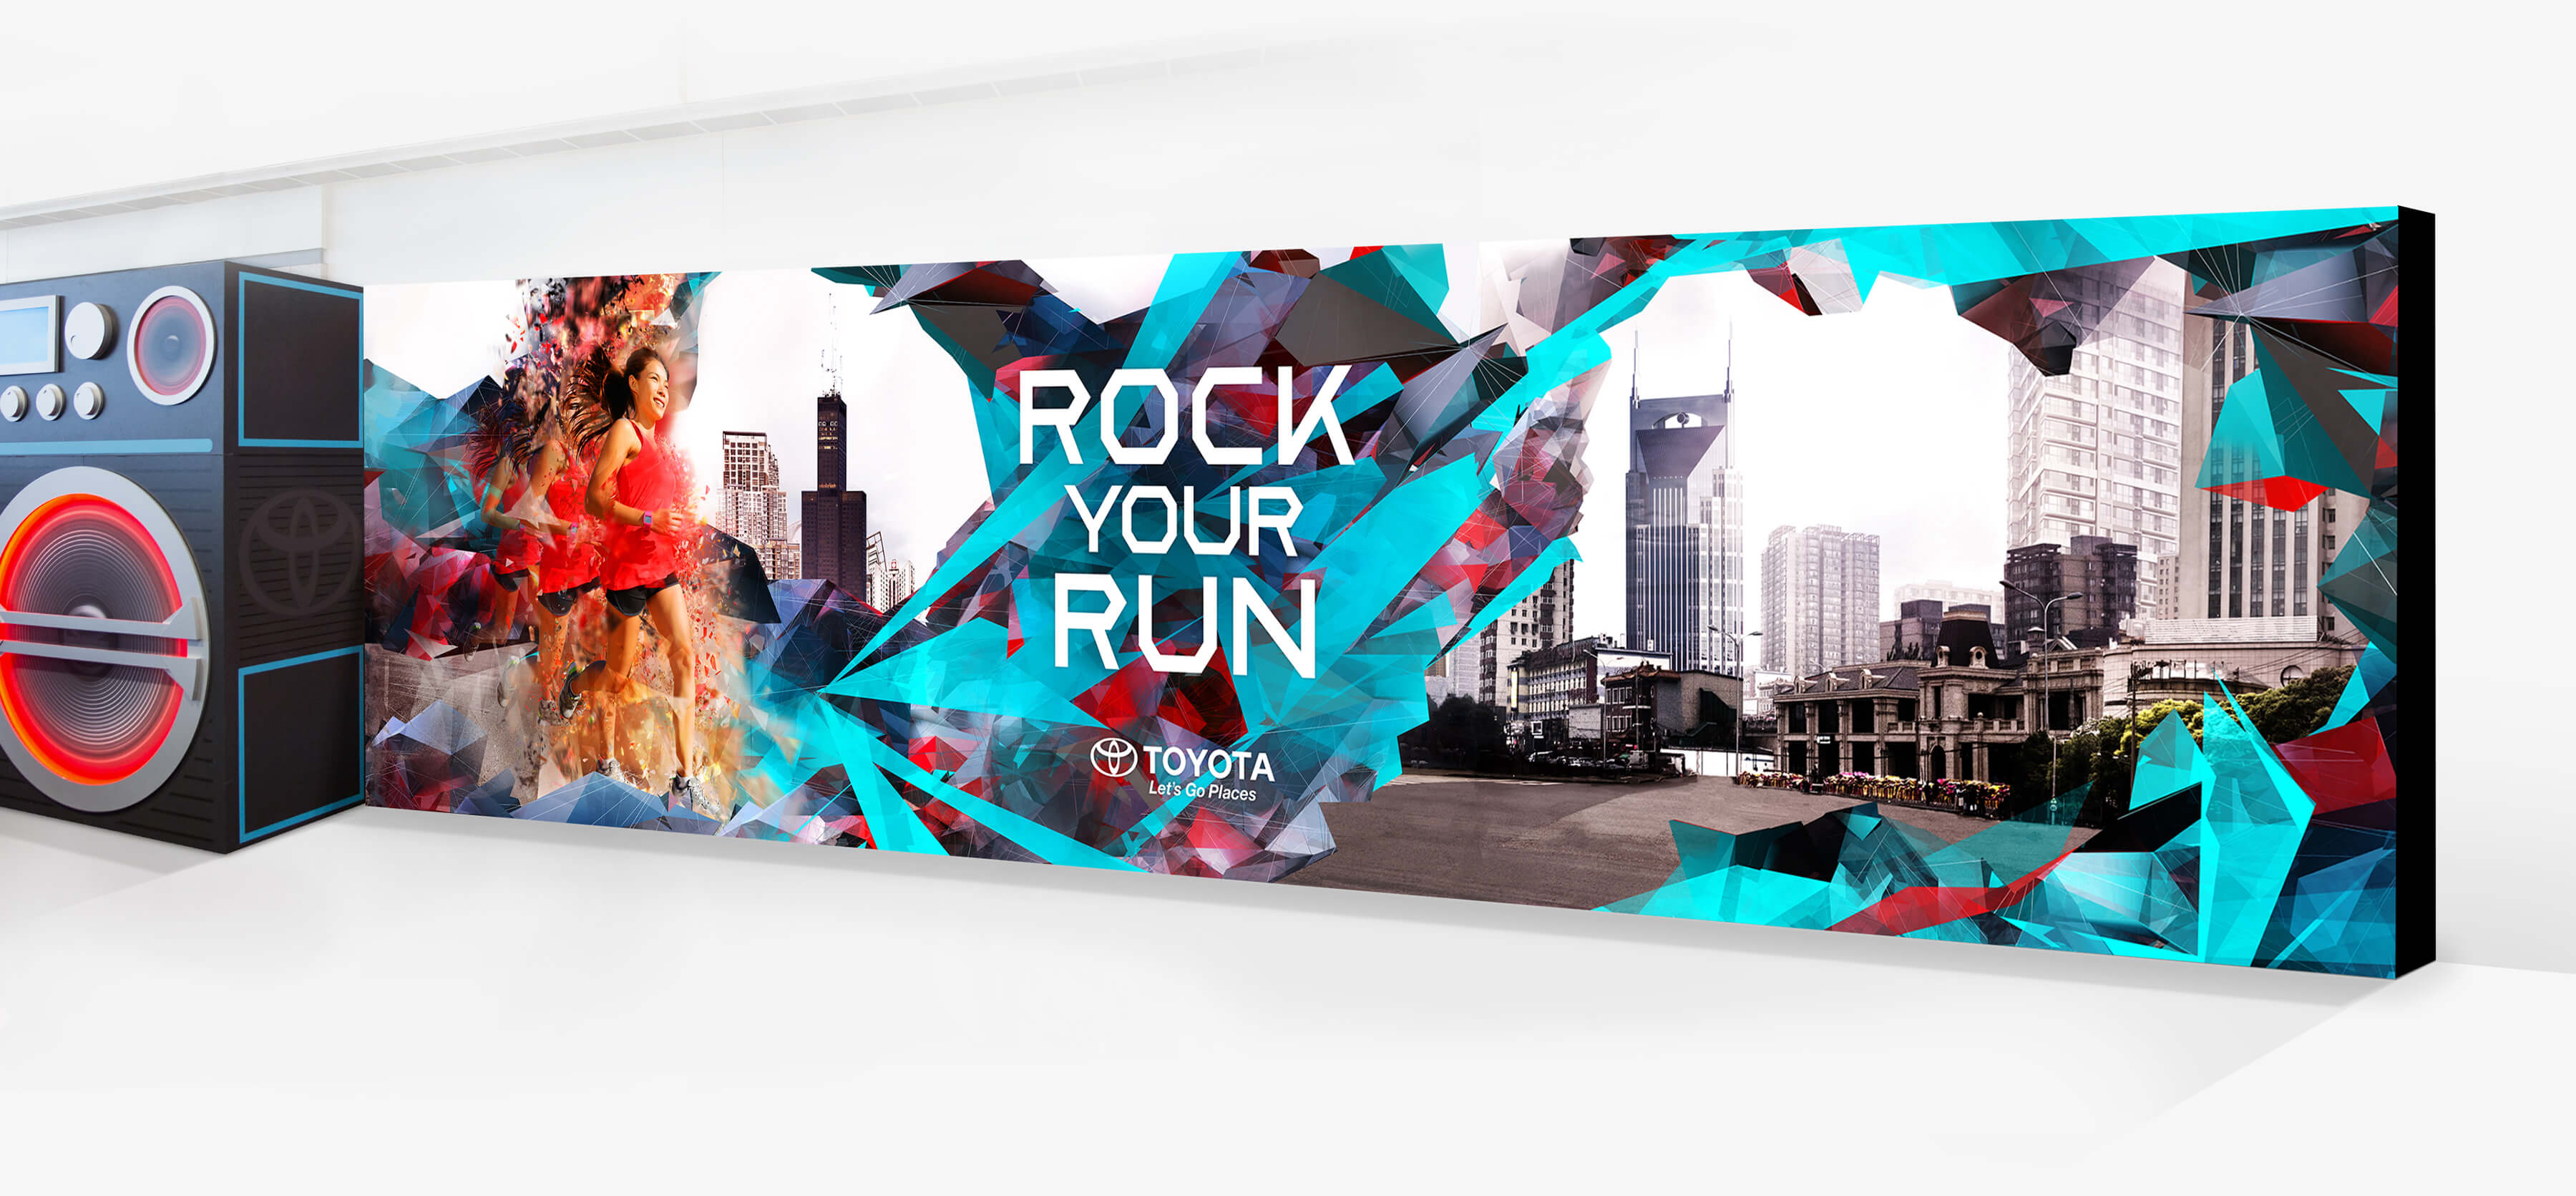 Toyota Rock Your Run back wall right panel featuring the Rock Your Run logo a city scape, the Chicago Willis Tower, the Nashville AT&T Batman Buildling, dynamic geometric fragments, male runner, and the boombox.